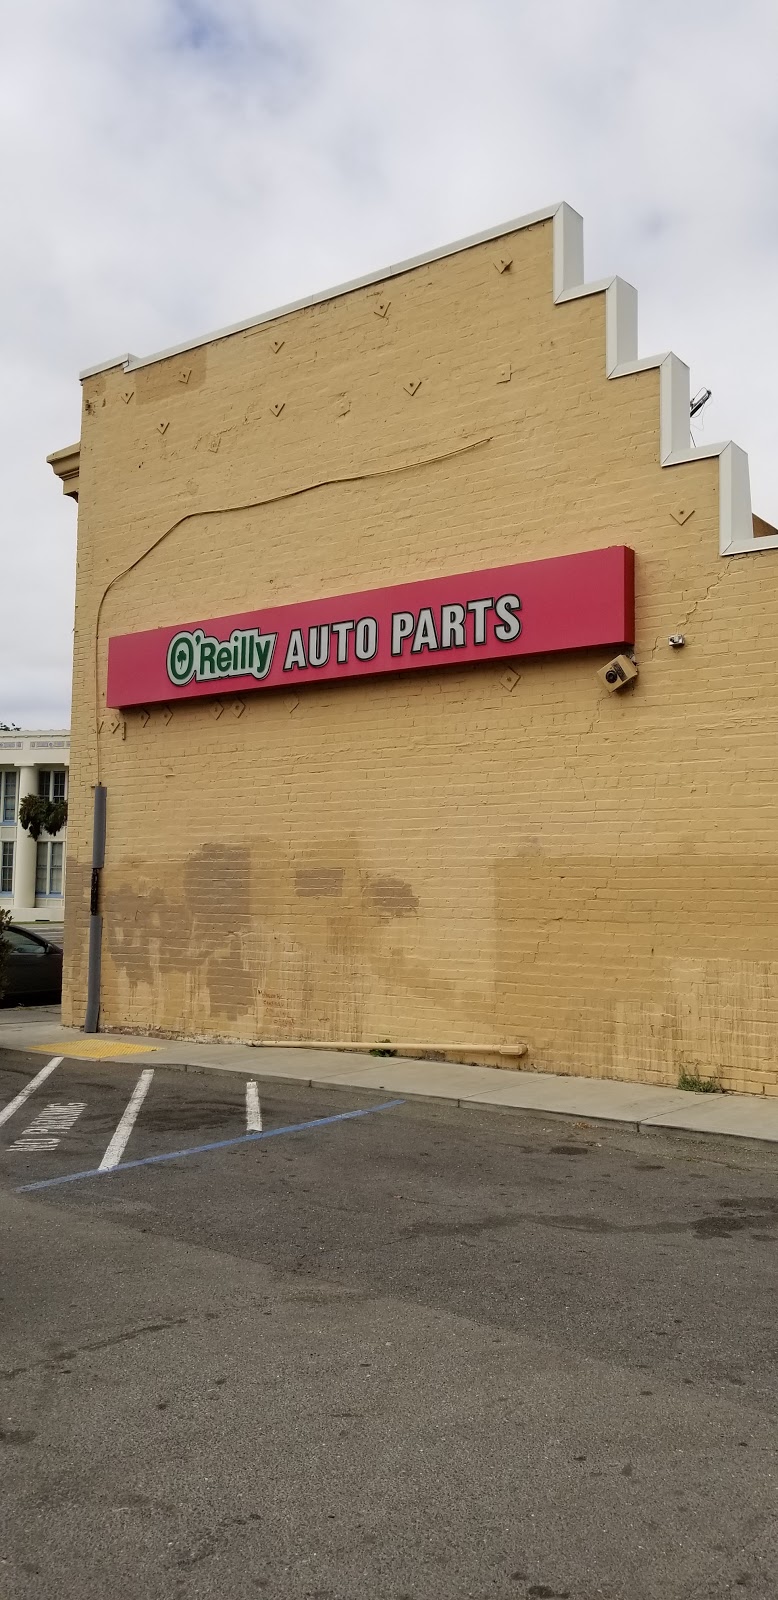 OReilly Auto Parts | 4400 Broadway, Oakland, CA 94611 | Phone: (510) 652-5318